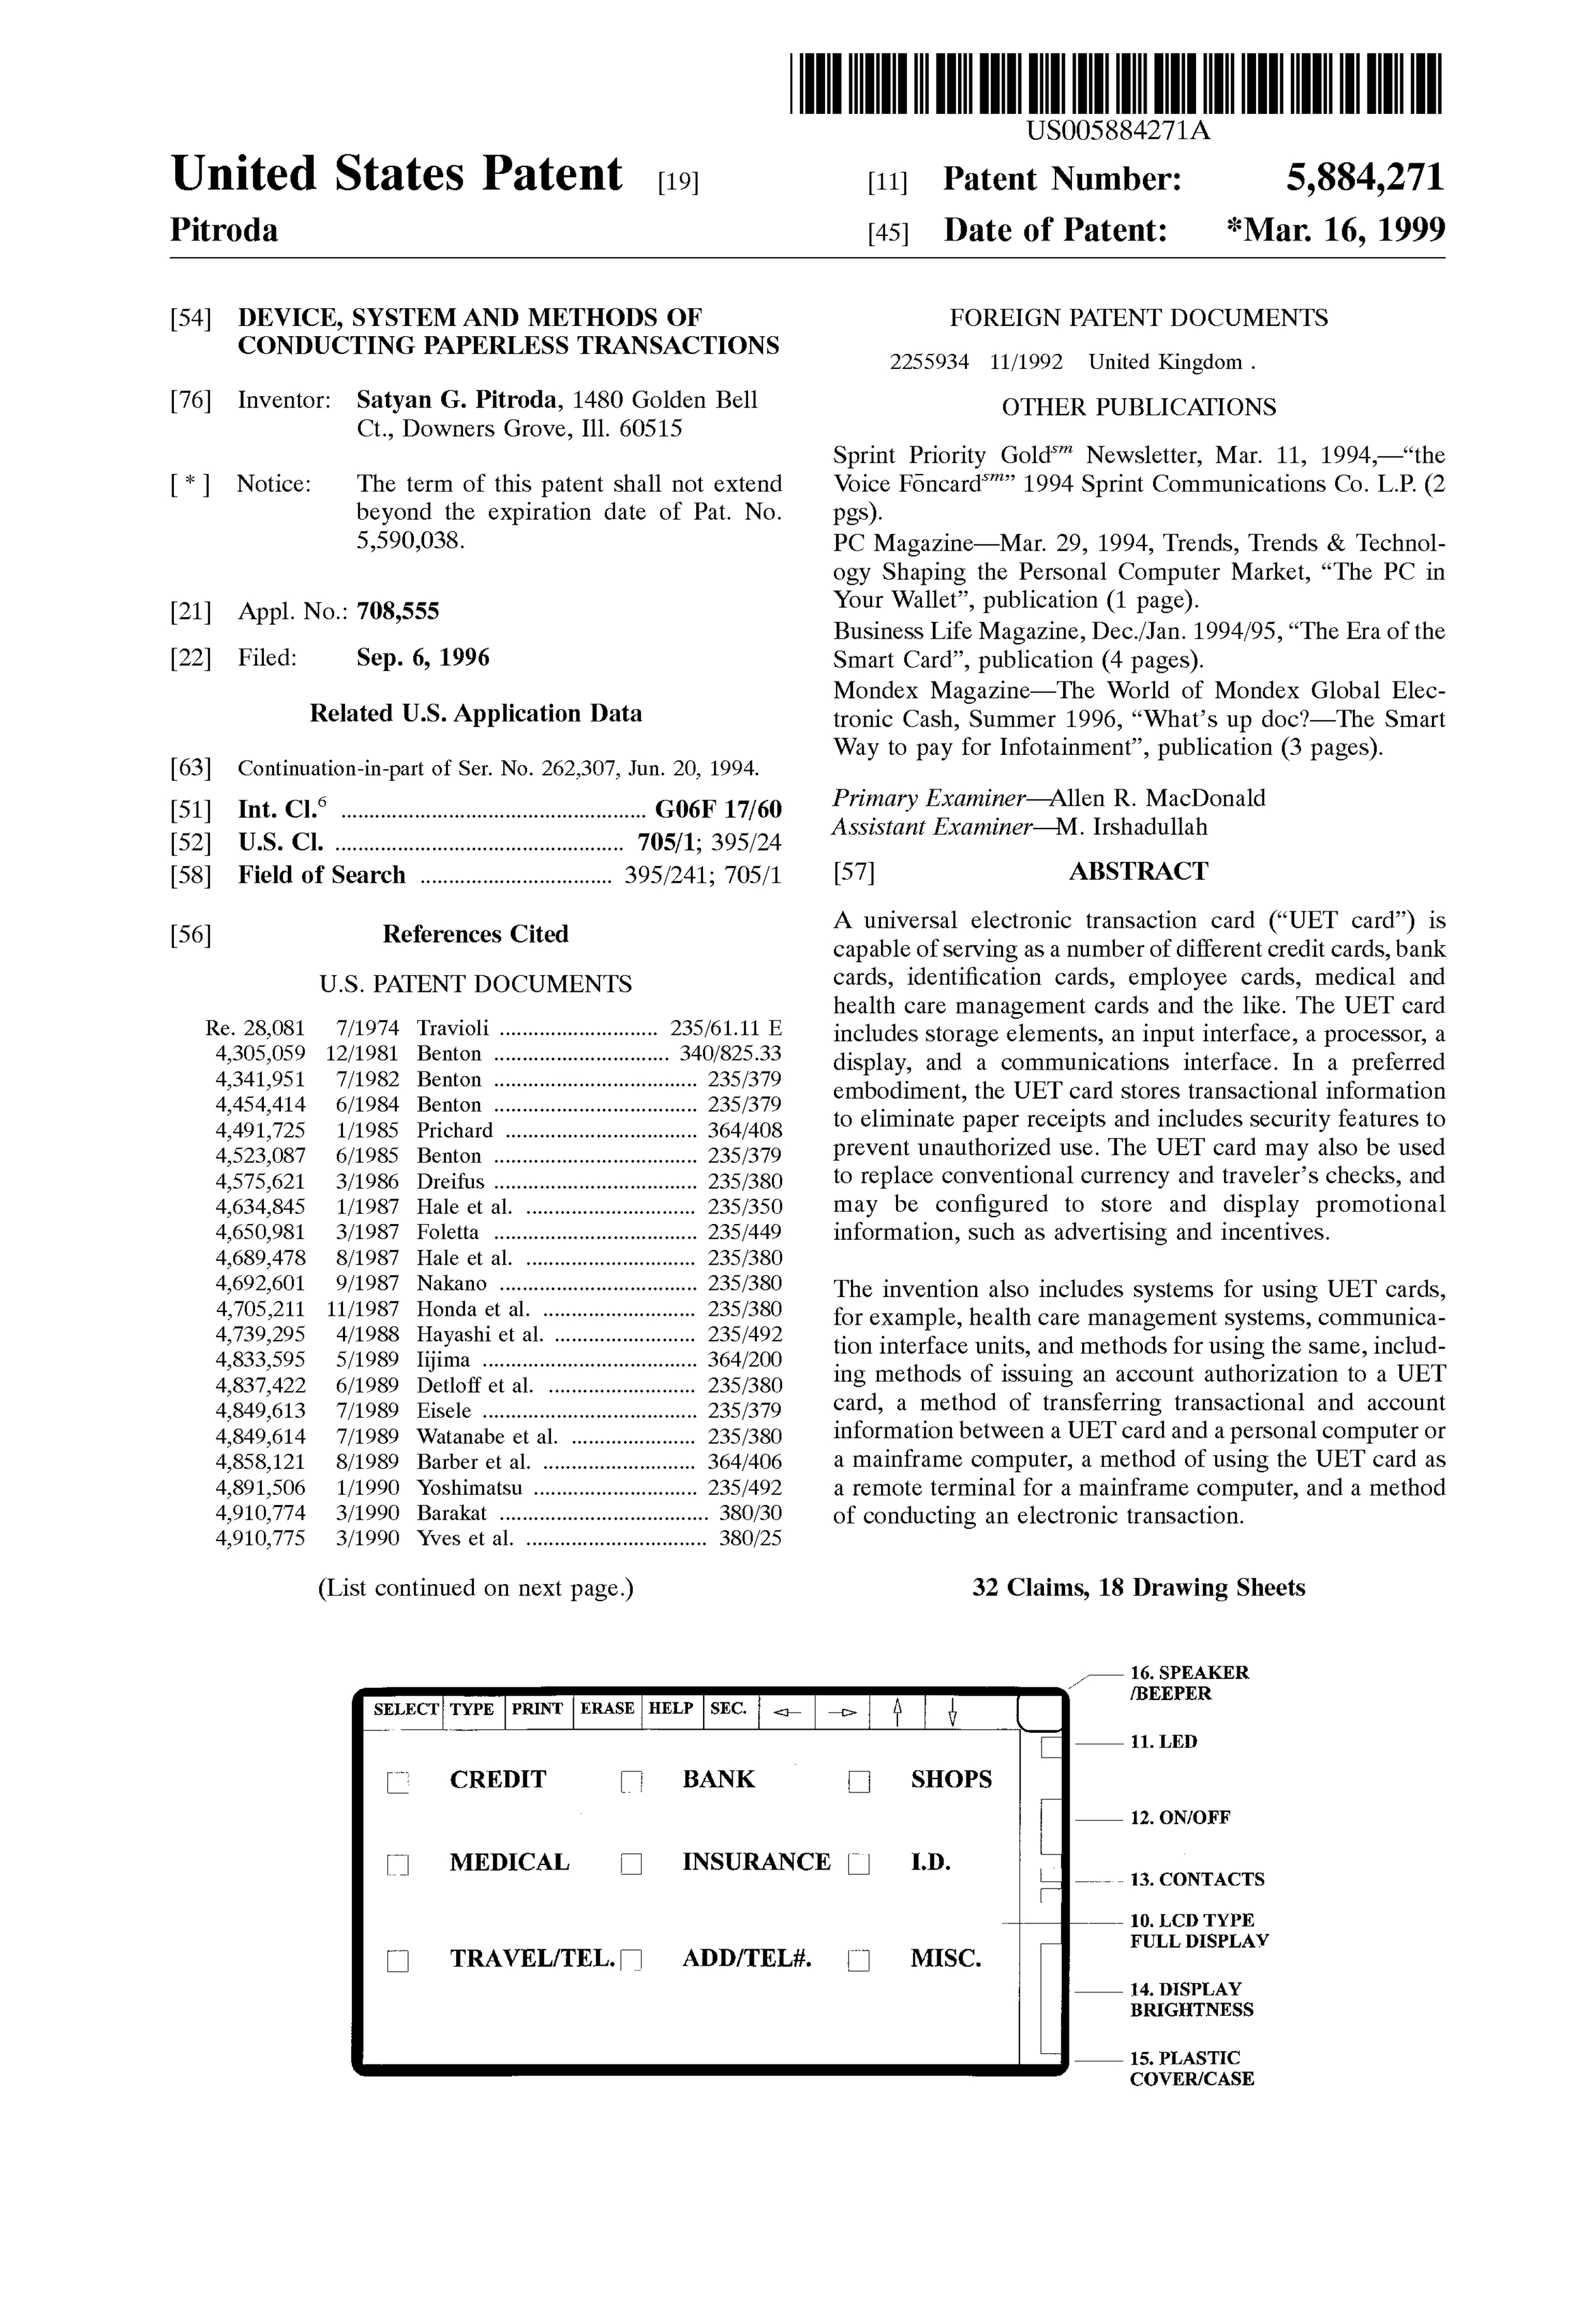 US5884271 Device, system and methods of conducting paperless transactions.jpg